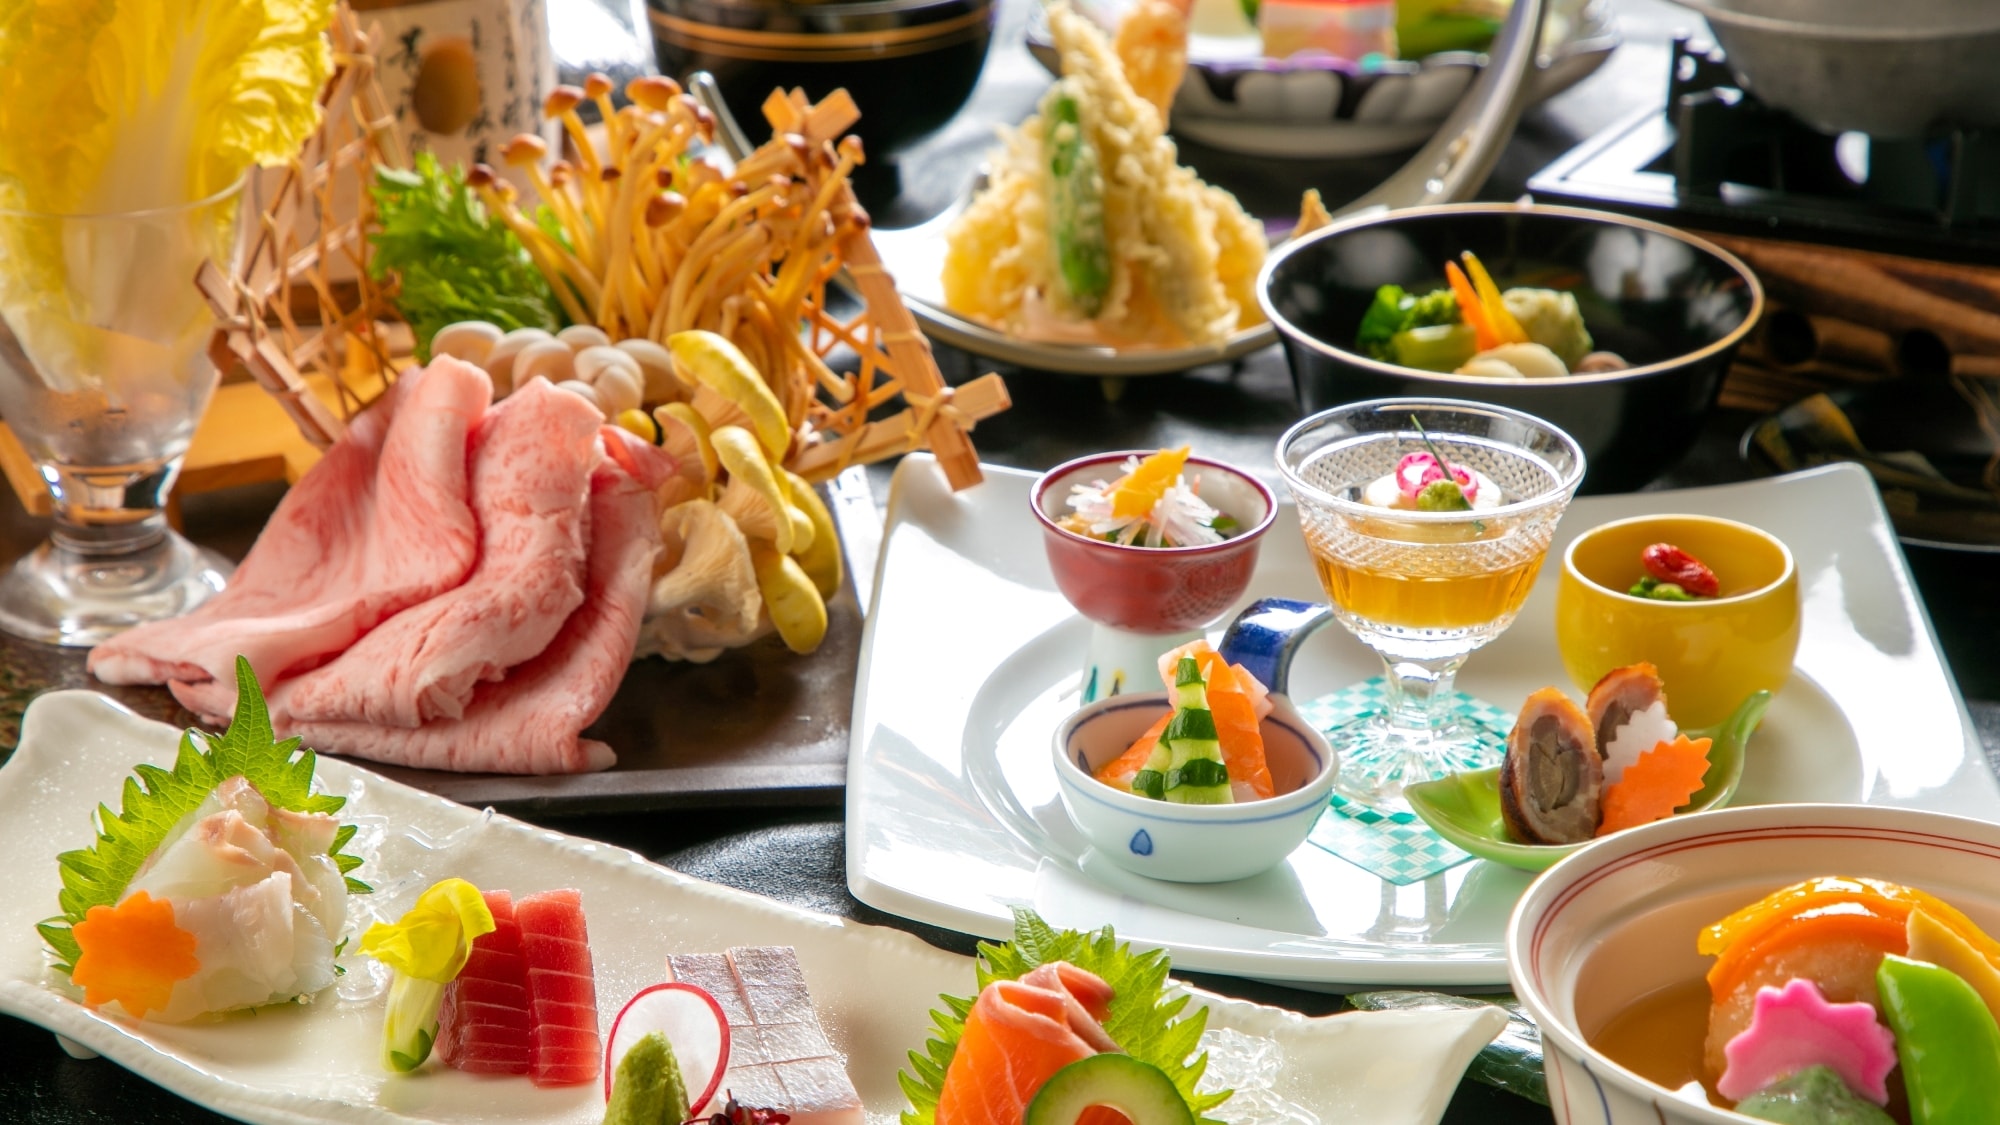 [Japanese Kaiseki] Hospitality with traditional taste and reliable techniques